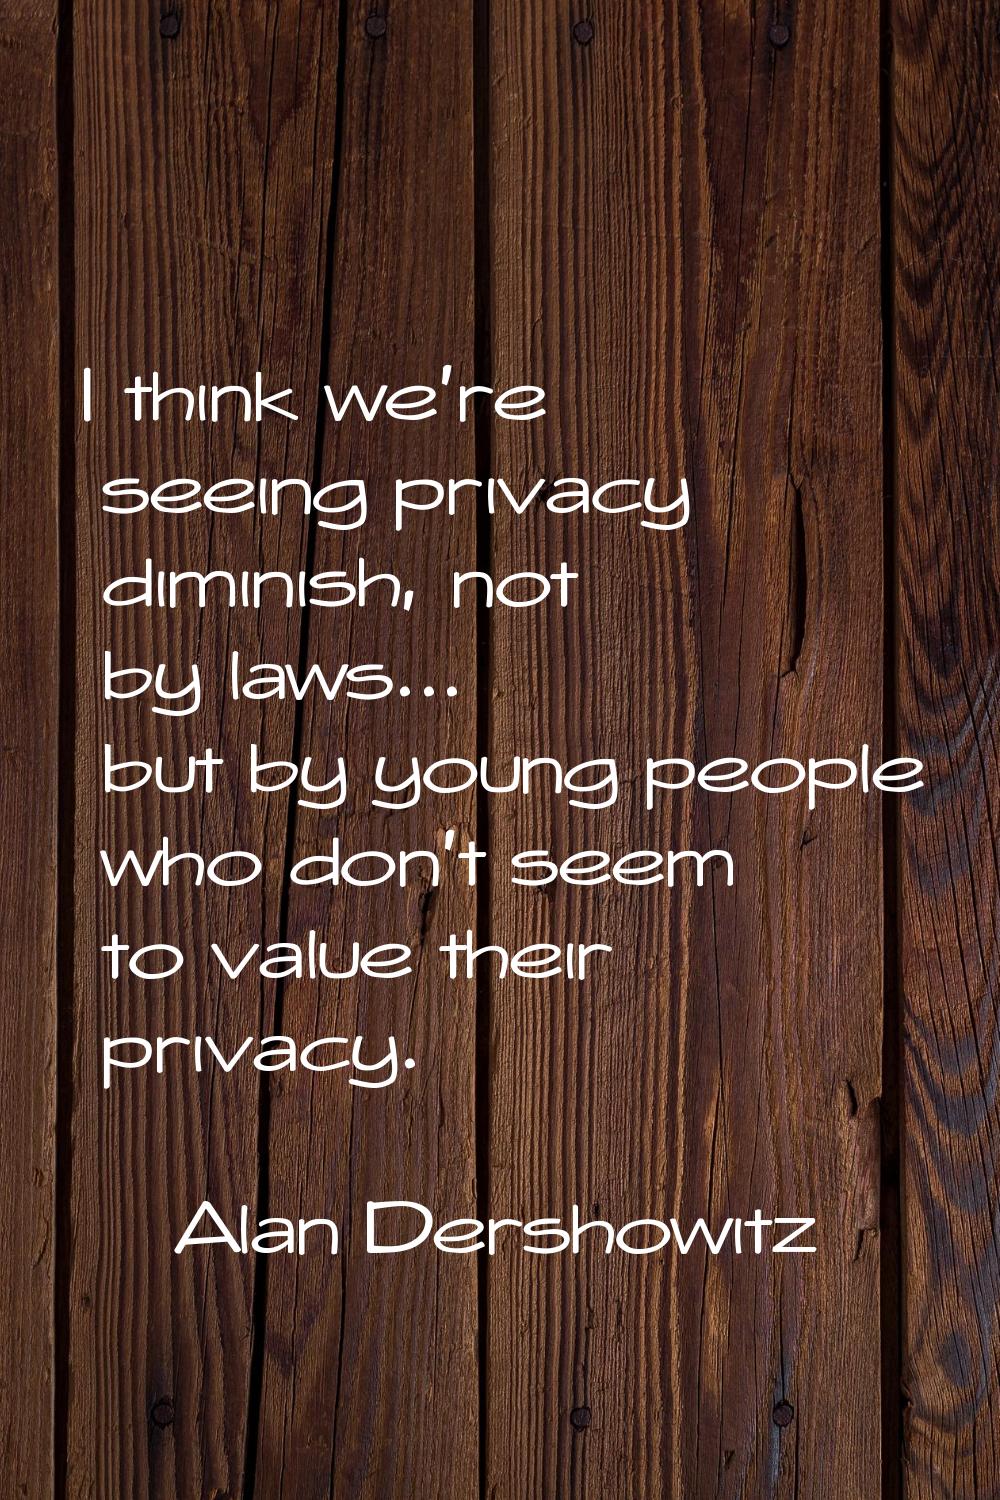 I think we're seeing privacy diminish, not by laws... but by young people who don't seem to value t